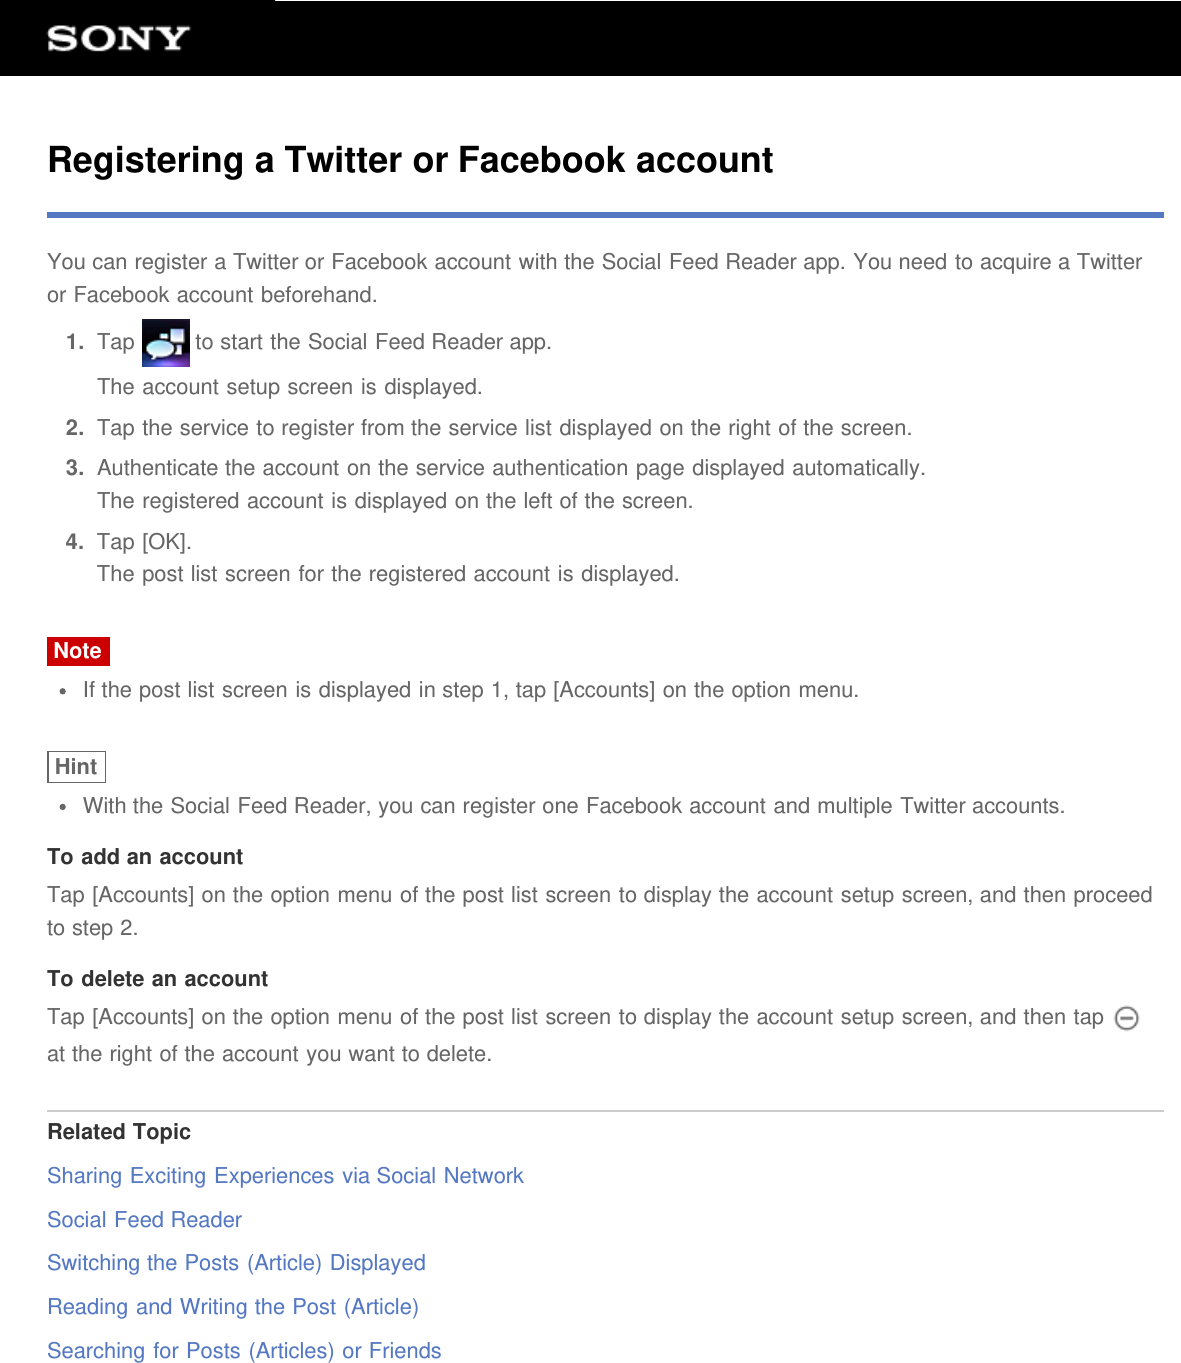 Registering a Twitter or Facebook accountYou can register a Twitter or Facebook account with the Social Feed Reader app. You need to acquire a Twitteror Facebook account beforehand.1.  Tap   to start the Social Feed Reader app.The account setup screen is displayed.2.  Tap the service to register from the service list displayed on the right of the screen.3.  Authenticate the account on the service authentication page displayed automatically.The registered account is displayed on the left of the screen.4.  Tap [OK].The post list screen for the registered account is displayed.NoteIf the post list screen is displayed in step 1, tap [Accounts] on the option menu.HintWith the Social Feed Reader, you can register one Facebook account and multiple Twitter accounts.To add an accountTap [Accounts] on the option menu of the post list screen to display the account setup screen, and then proceedto step 2.To delete an accountTap [Accounts] on the option menu of the post list screen to display the account setup screen, and then tap at the right of the account you want to delete.Related TopicSharing Exciting Experiences via Social NetworkSocial Feed ReaderSwitching the Posts (Article) DisplayedReading and Writing the Post (Article)Searching for Posts (Articles) or Friends